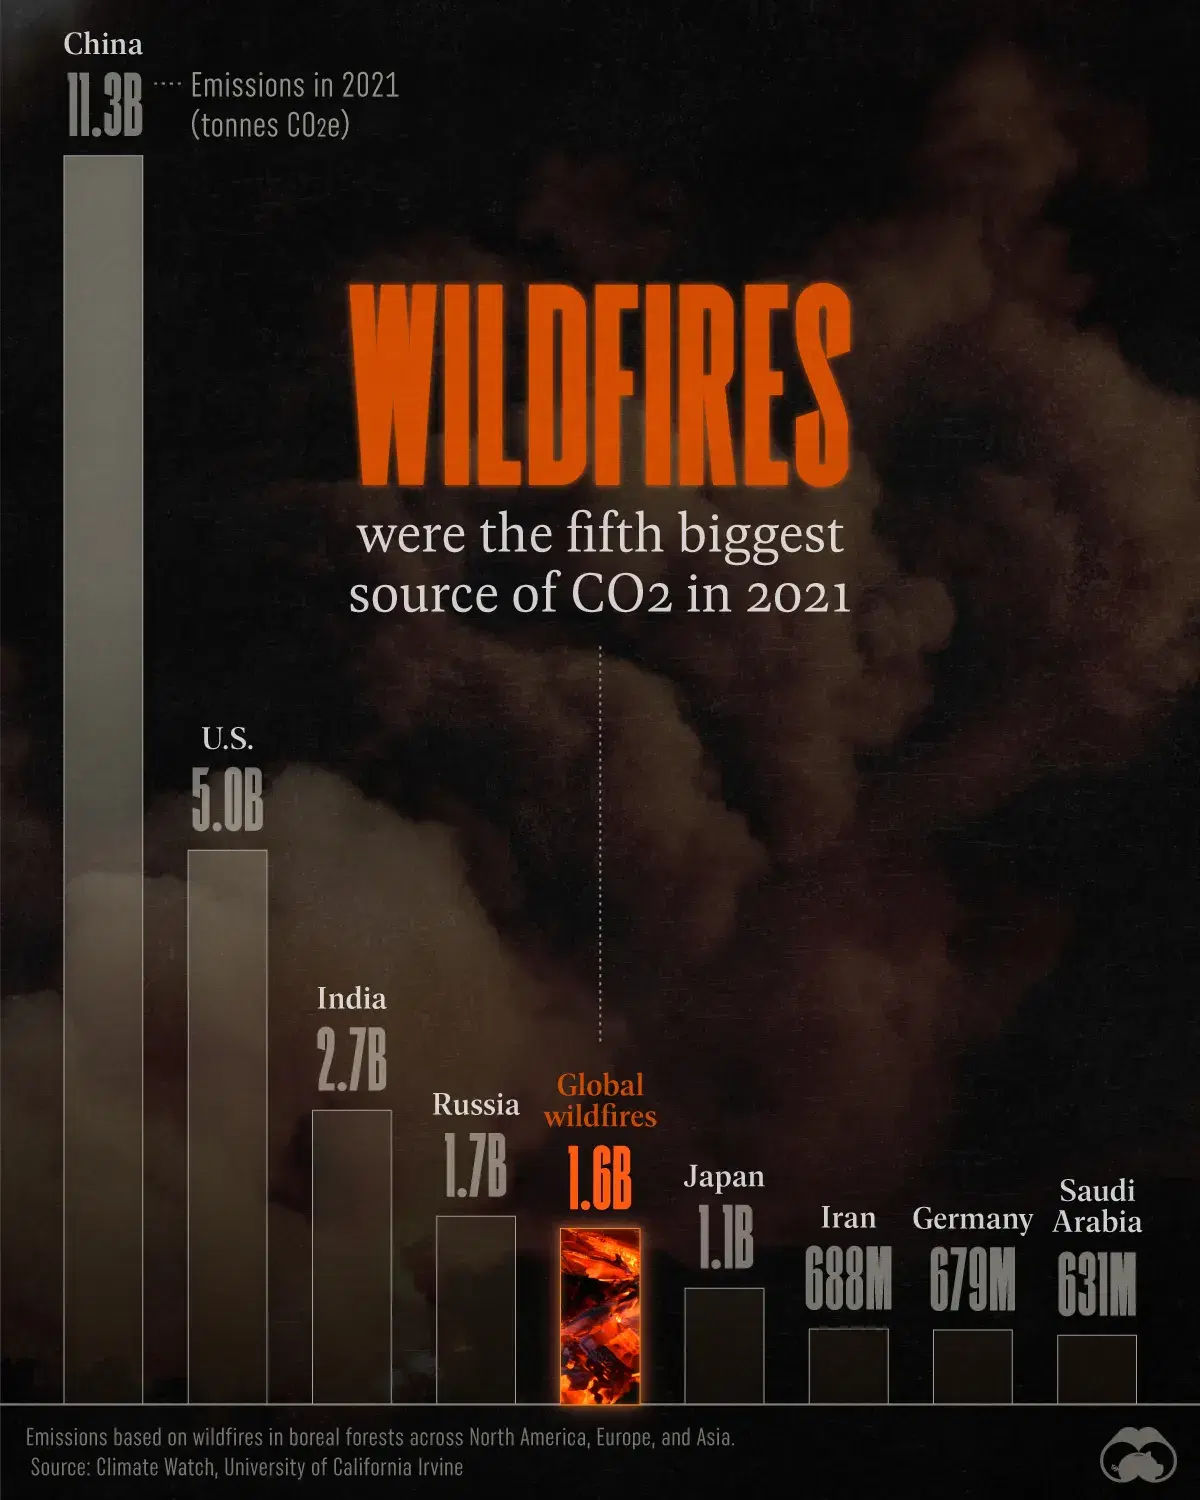 How Much CO2 do Wildfires Contribute Globally? 